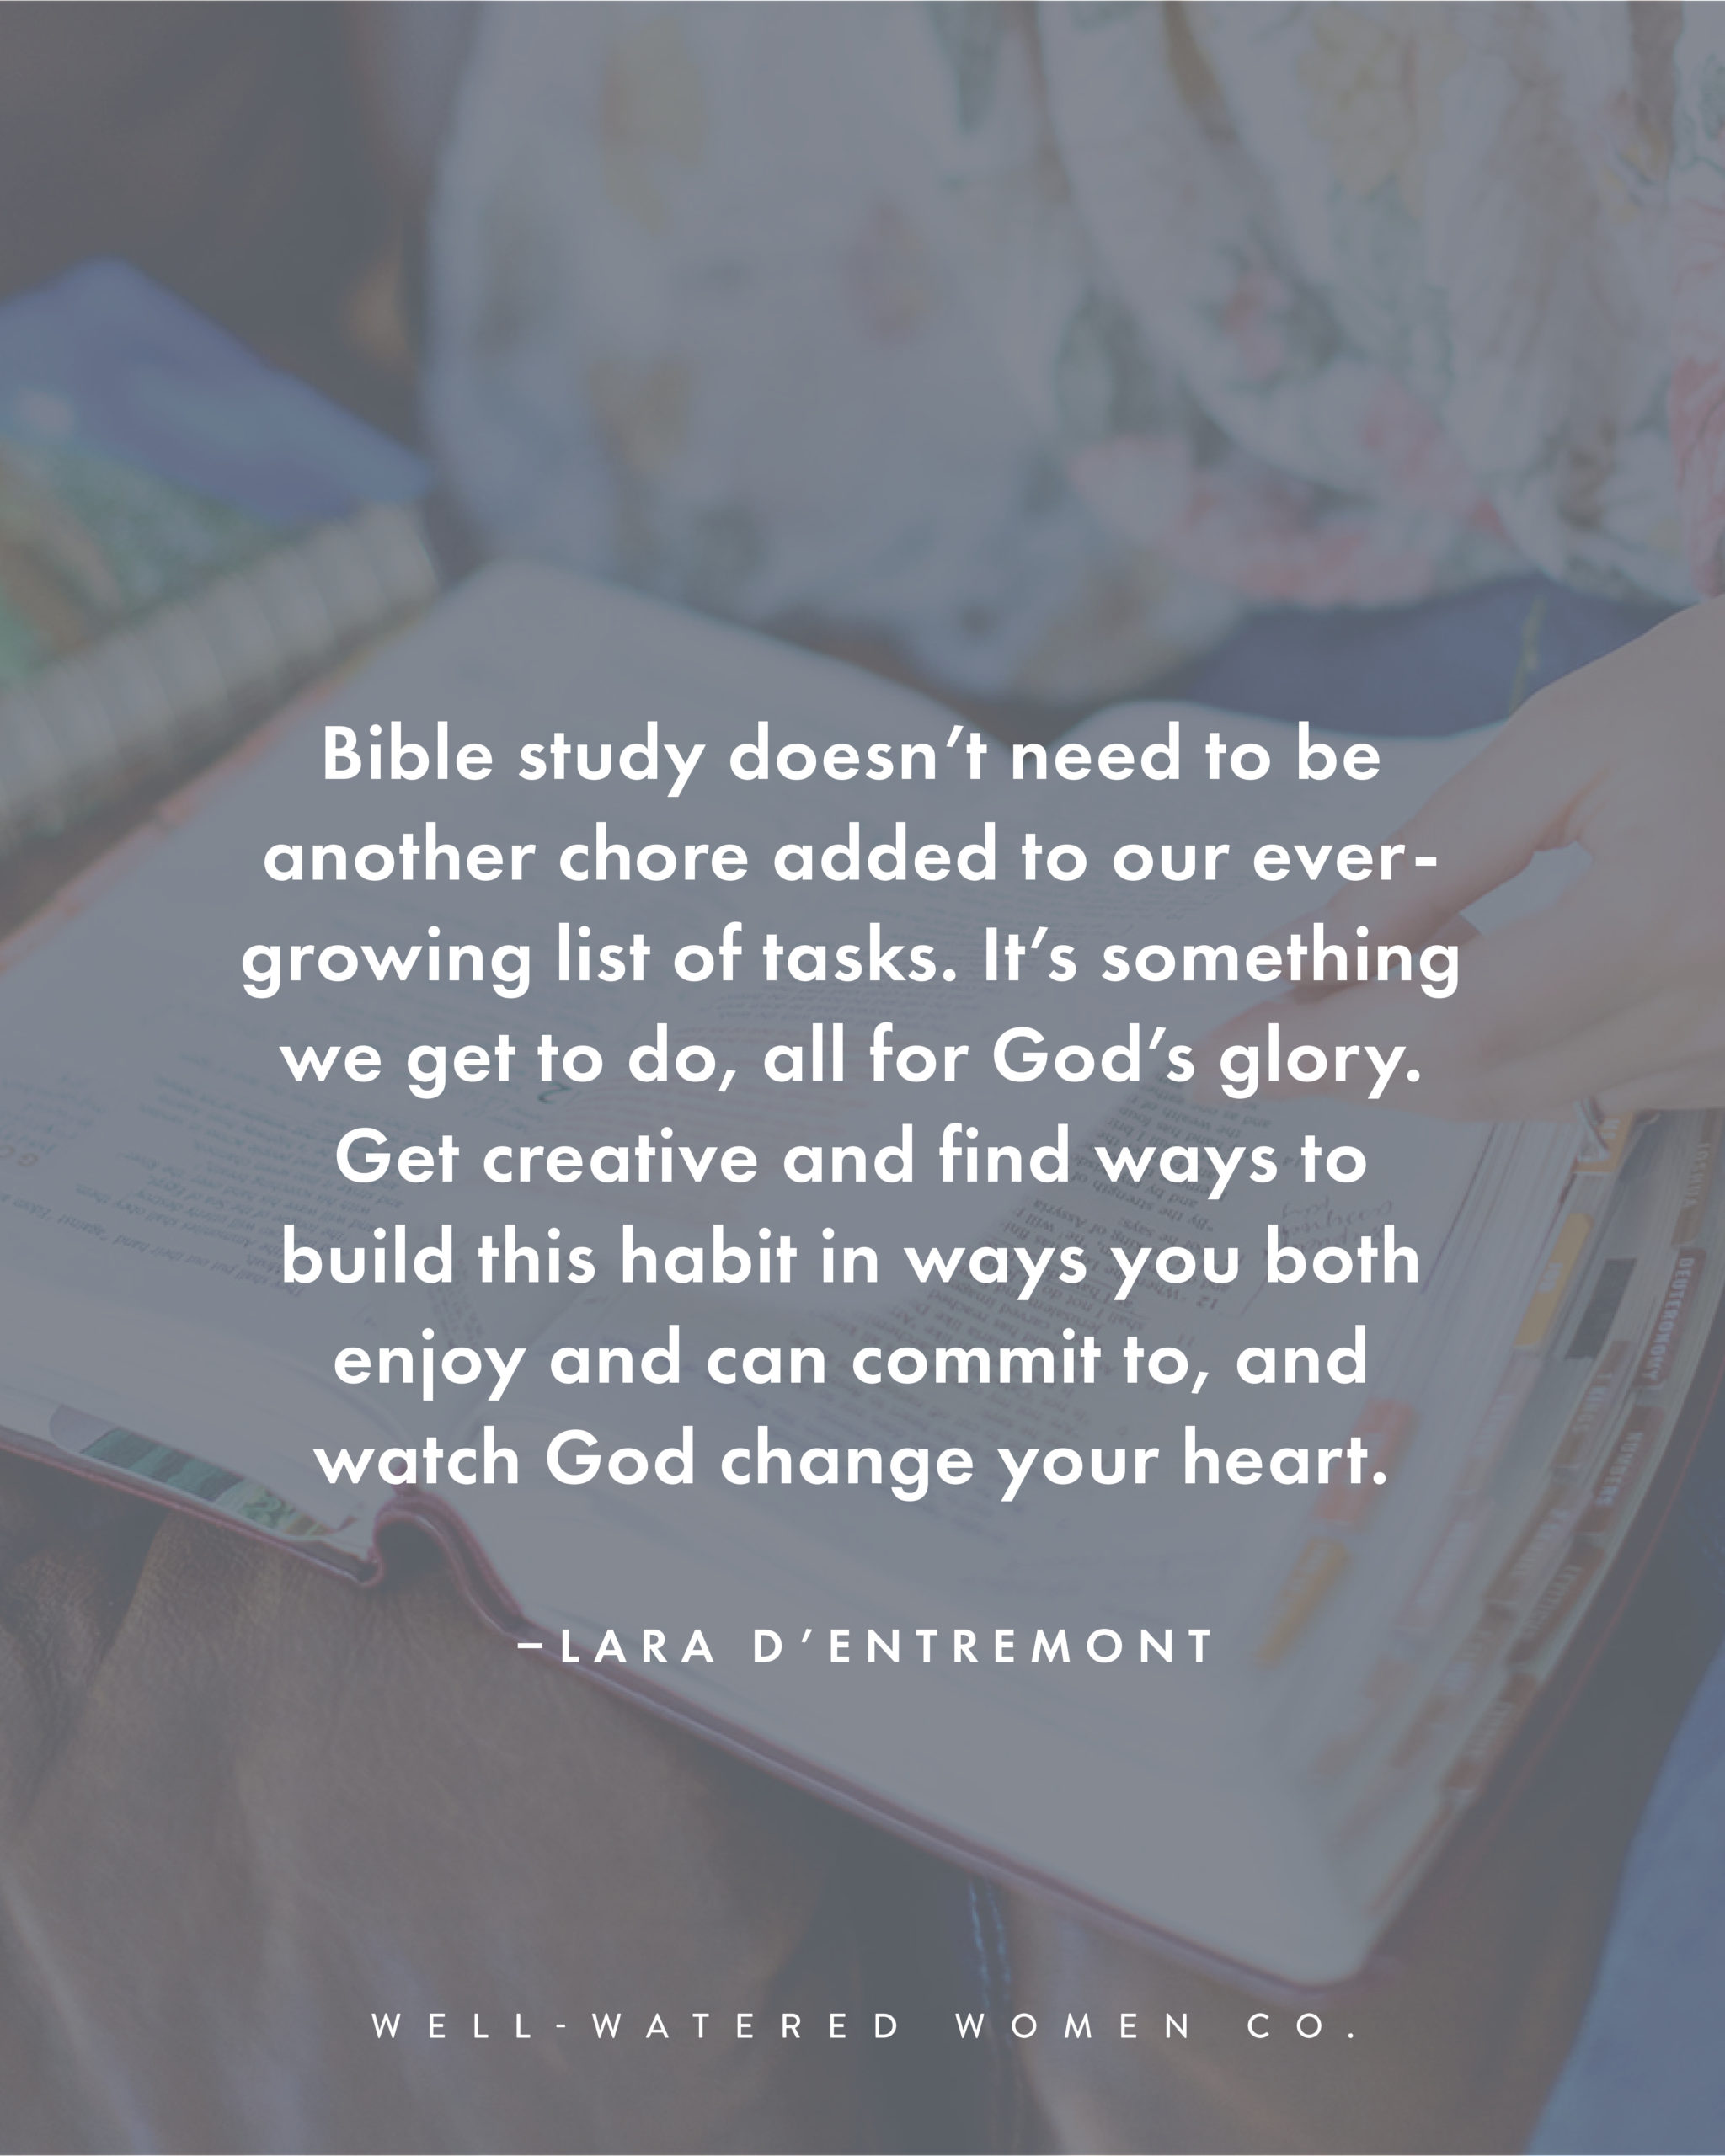 How to Get Back on Track with Bible Study - an article by Well-Watered Women - quote